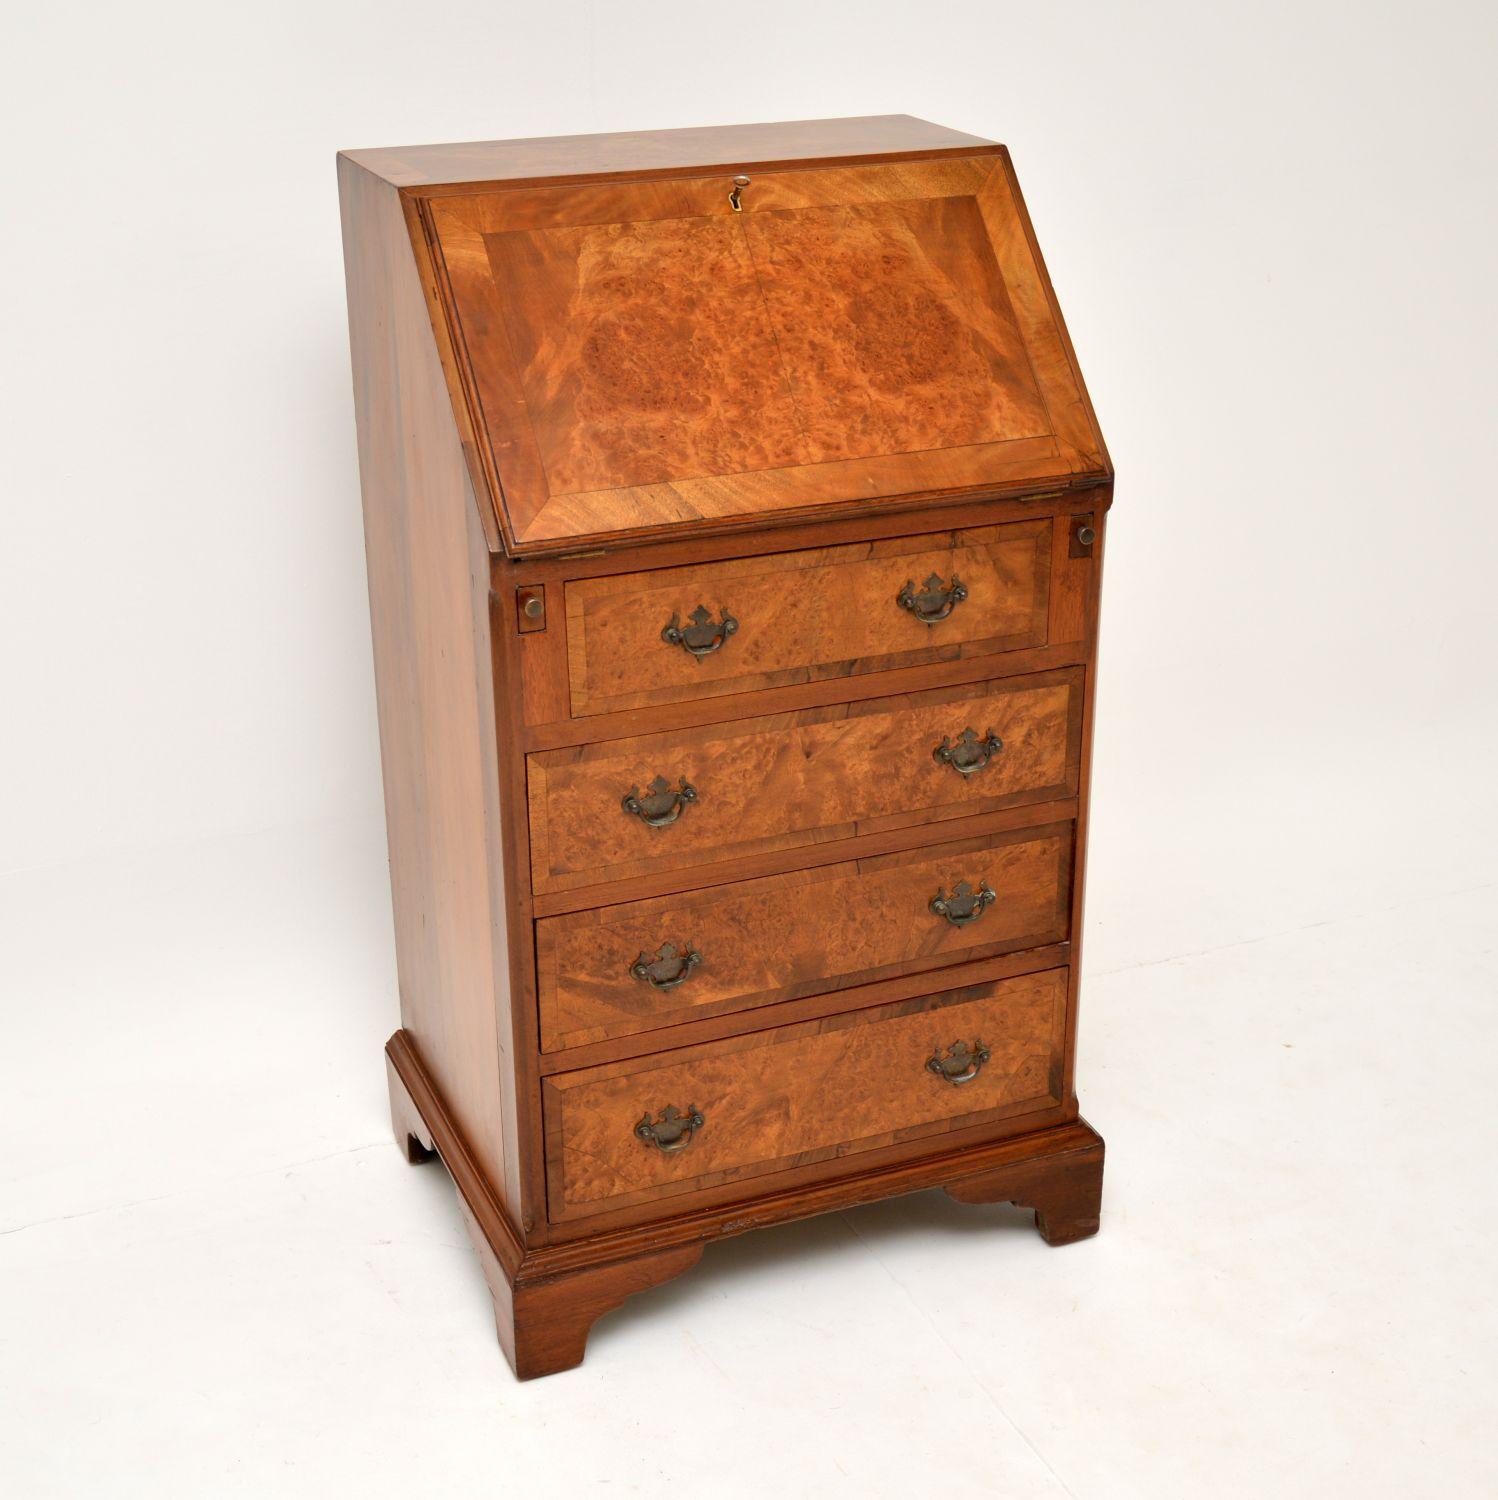 A smart and very useful antique writing bureau, beautifully made from burr walnut. This is in the antique Georgian style & dates from around 1900-1920’s

It’s of very high quality and is a great size. It is slim and doesn’t take up too much space,